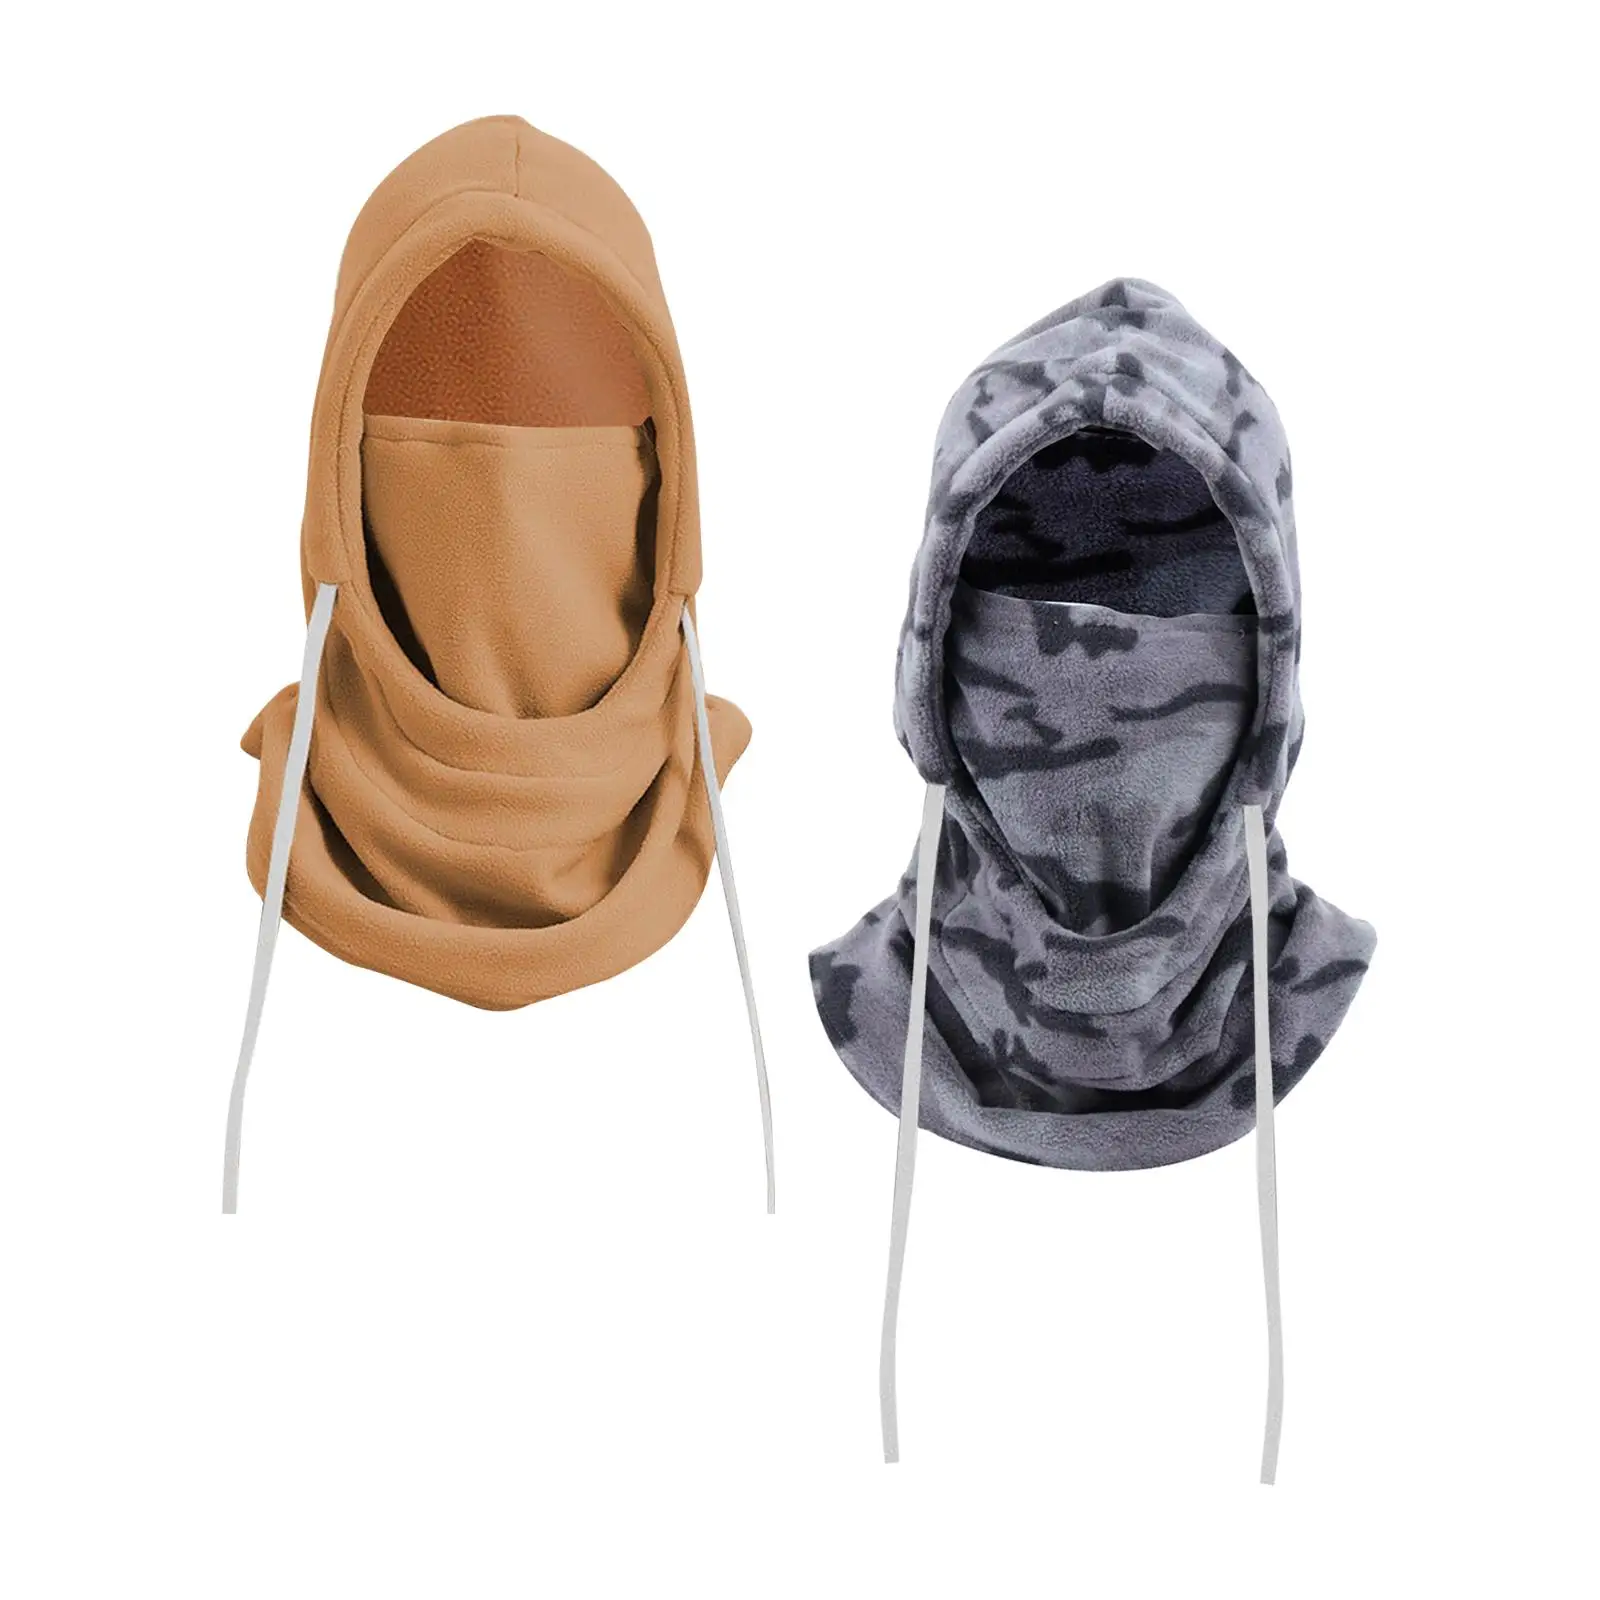 Balaclava Face Cover Windproof Neck Warmer Universal for Men and Women